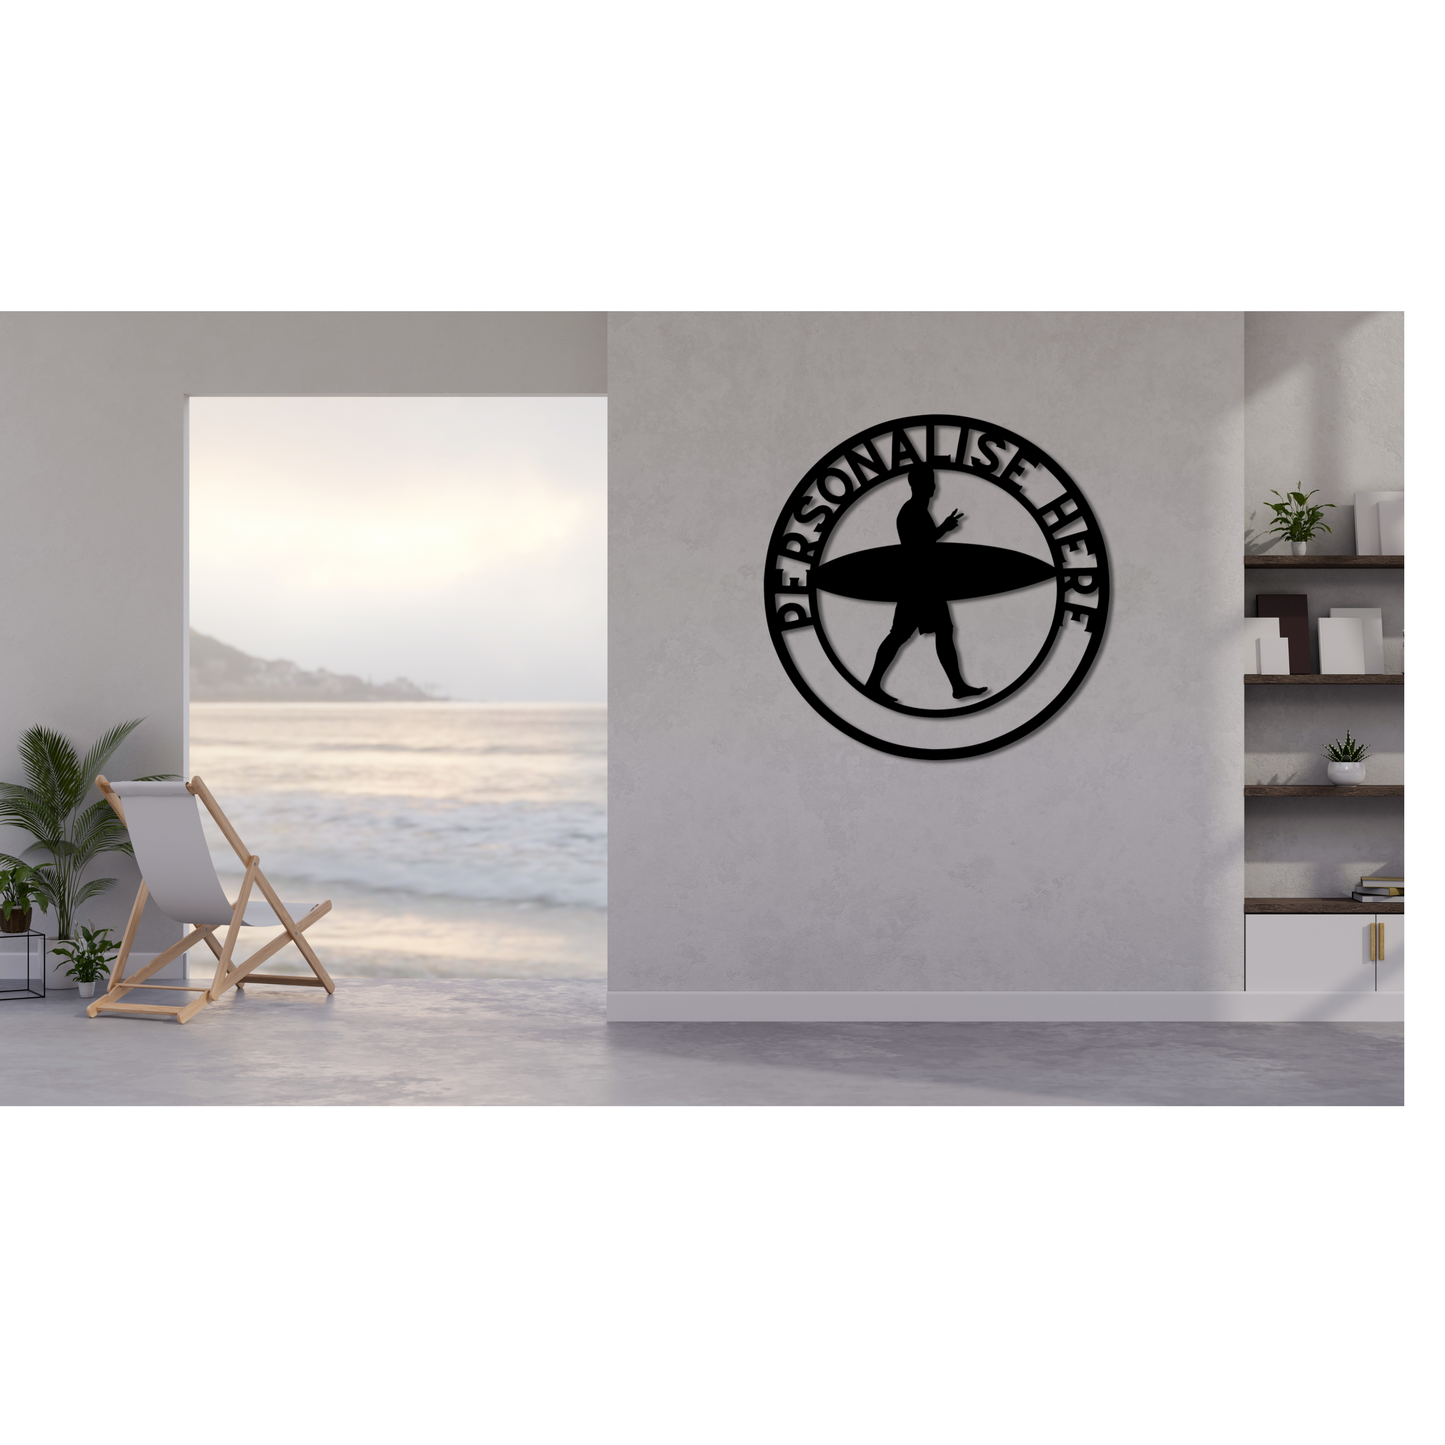 Personalized Surfer Metal Sign - Customised Surfing Wall Decor, Surder Metal Signs Customized